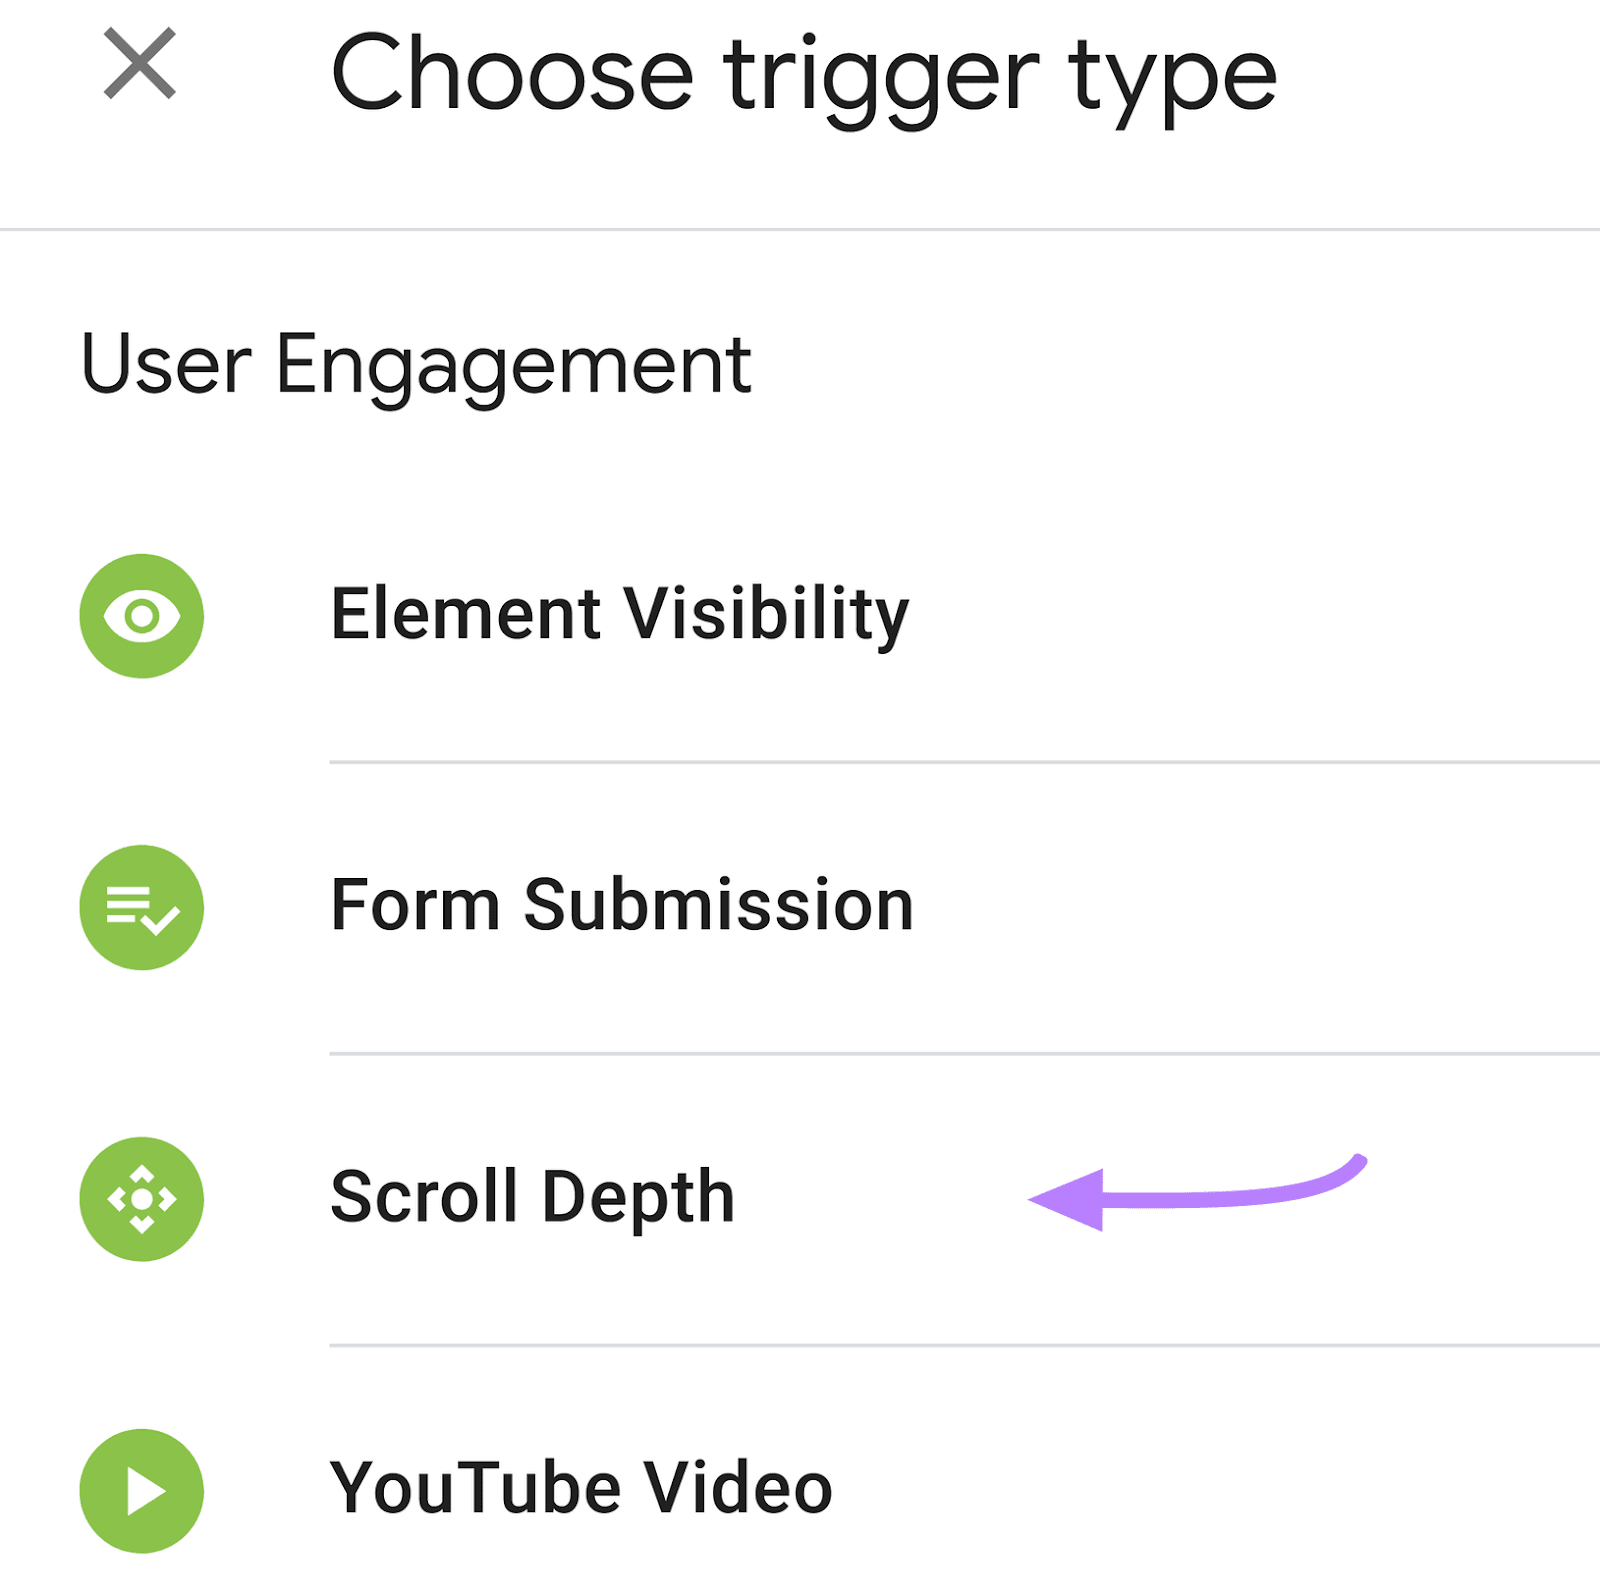 “Scroll Depth” enactment    selected nether  “User Engagement” area